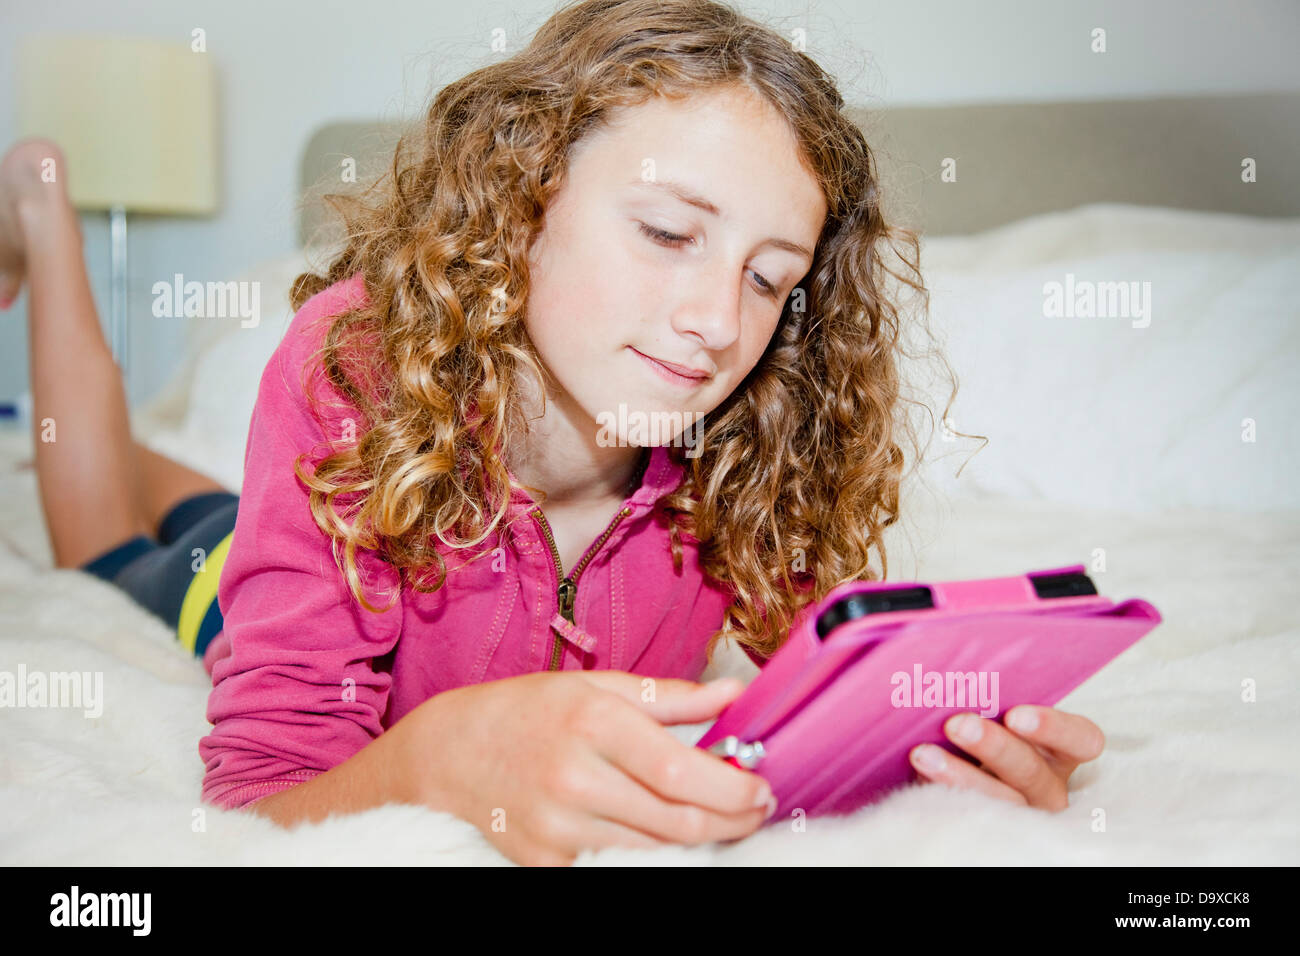 Teen girl on bed with tablet Banque D'Images